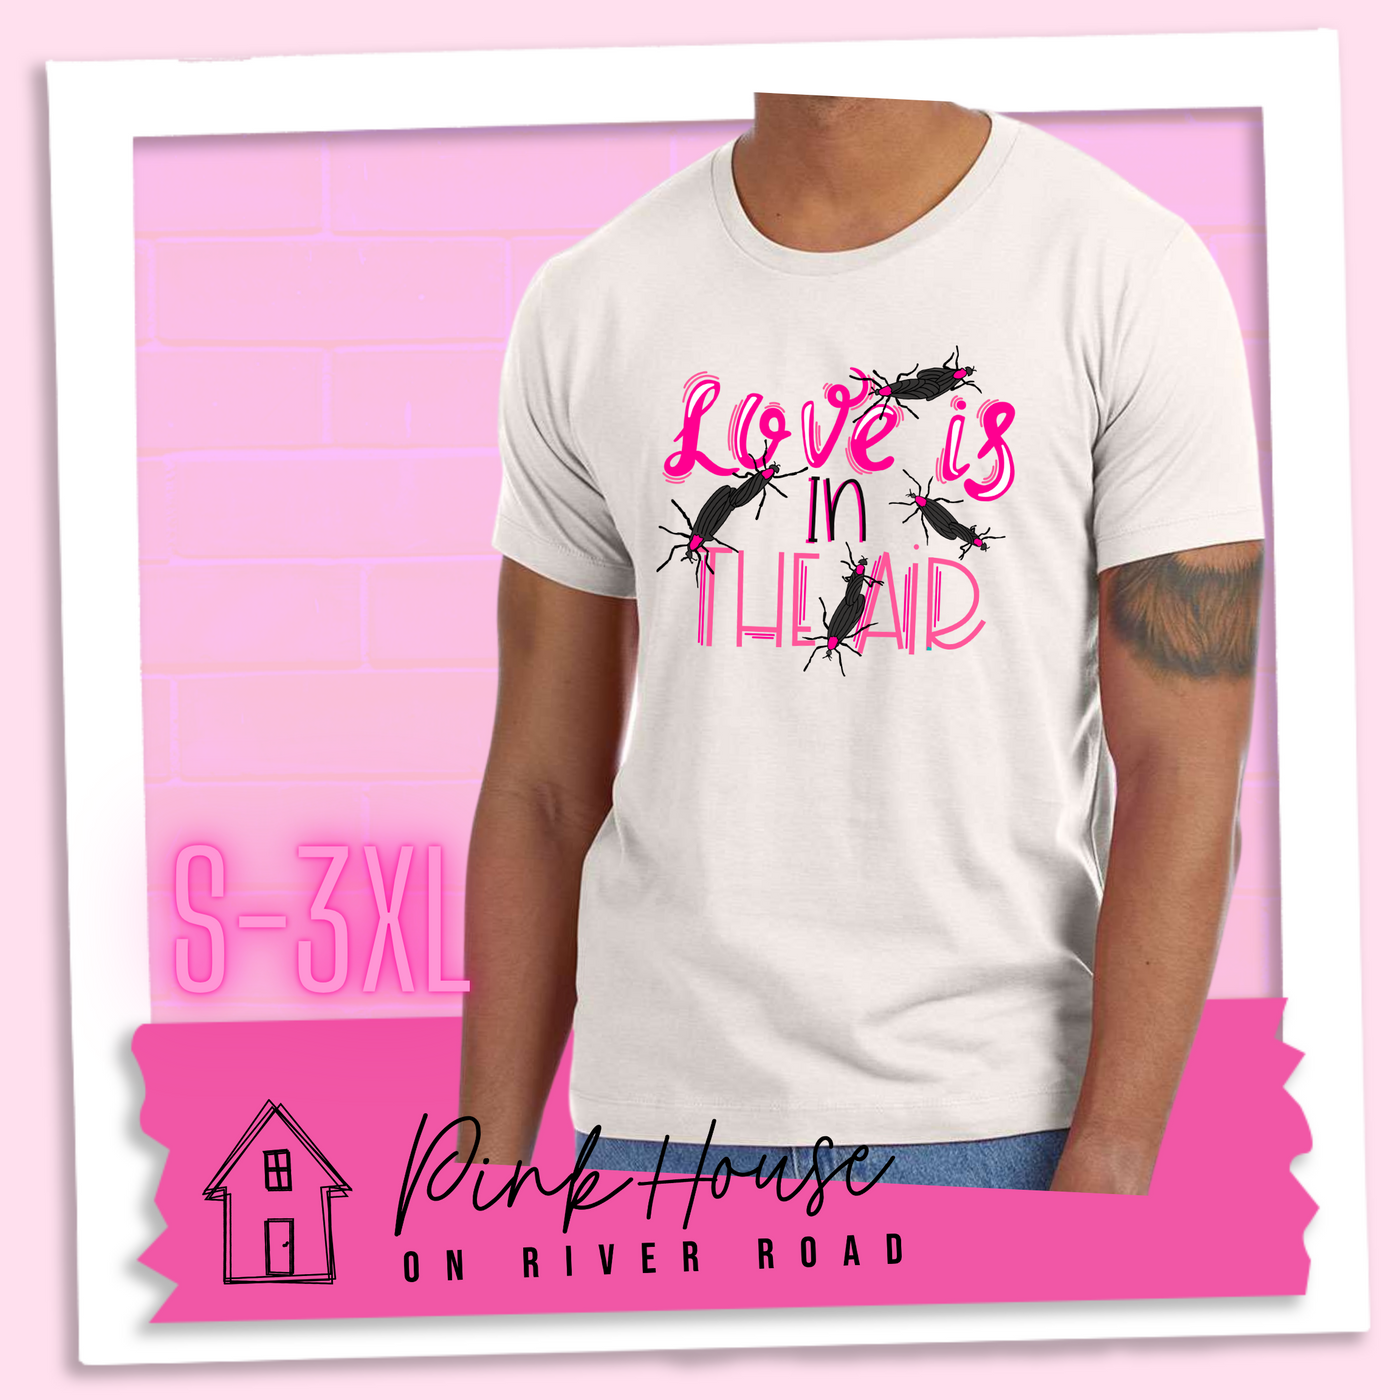 Dust Tee with Graphic. Graphic says " Love Is in the Air". "Love Is" is a hot pink cursive font with white highlights and hot pink accent lines underneath is the word "In" Is it in a black font with a hot pink highlight. on the bottom is "The Air" in Light pink with light pink accent lines. There are also black flying bugs with hot pink spots behind their heads